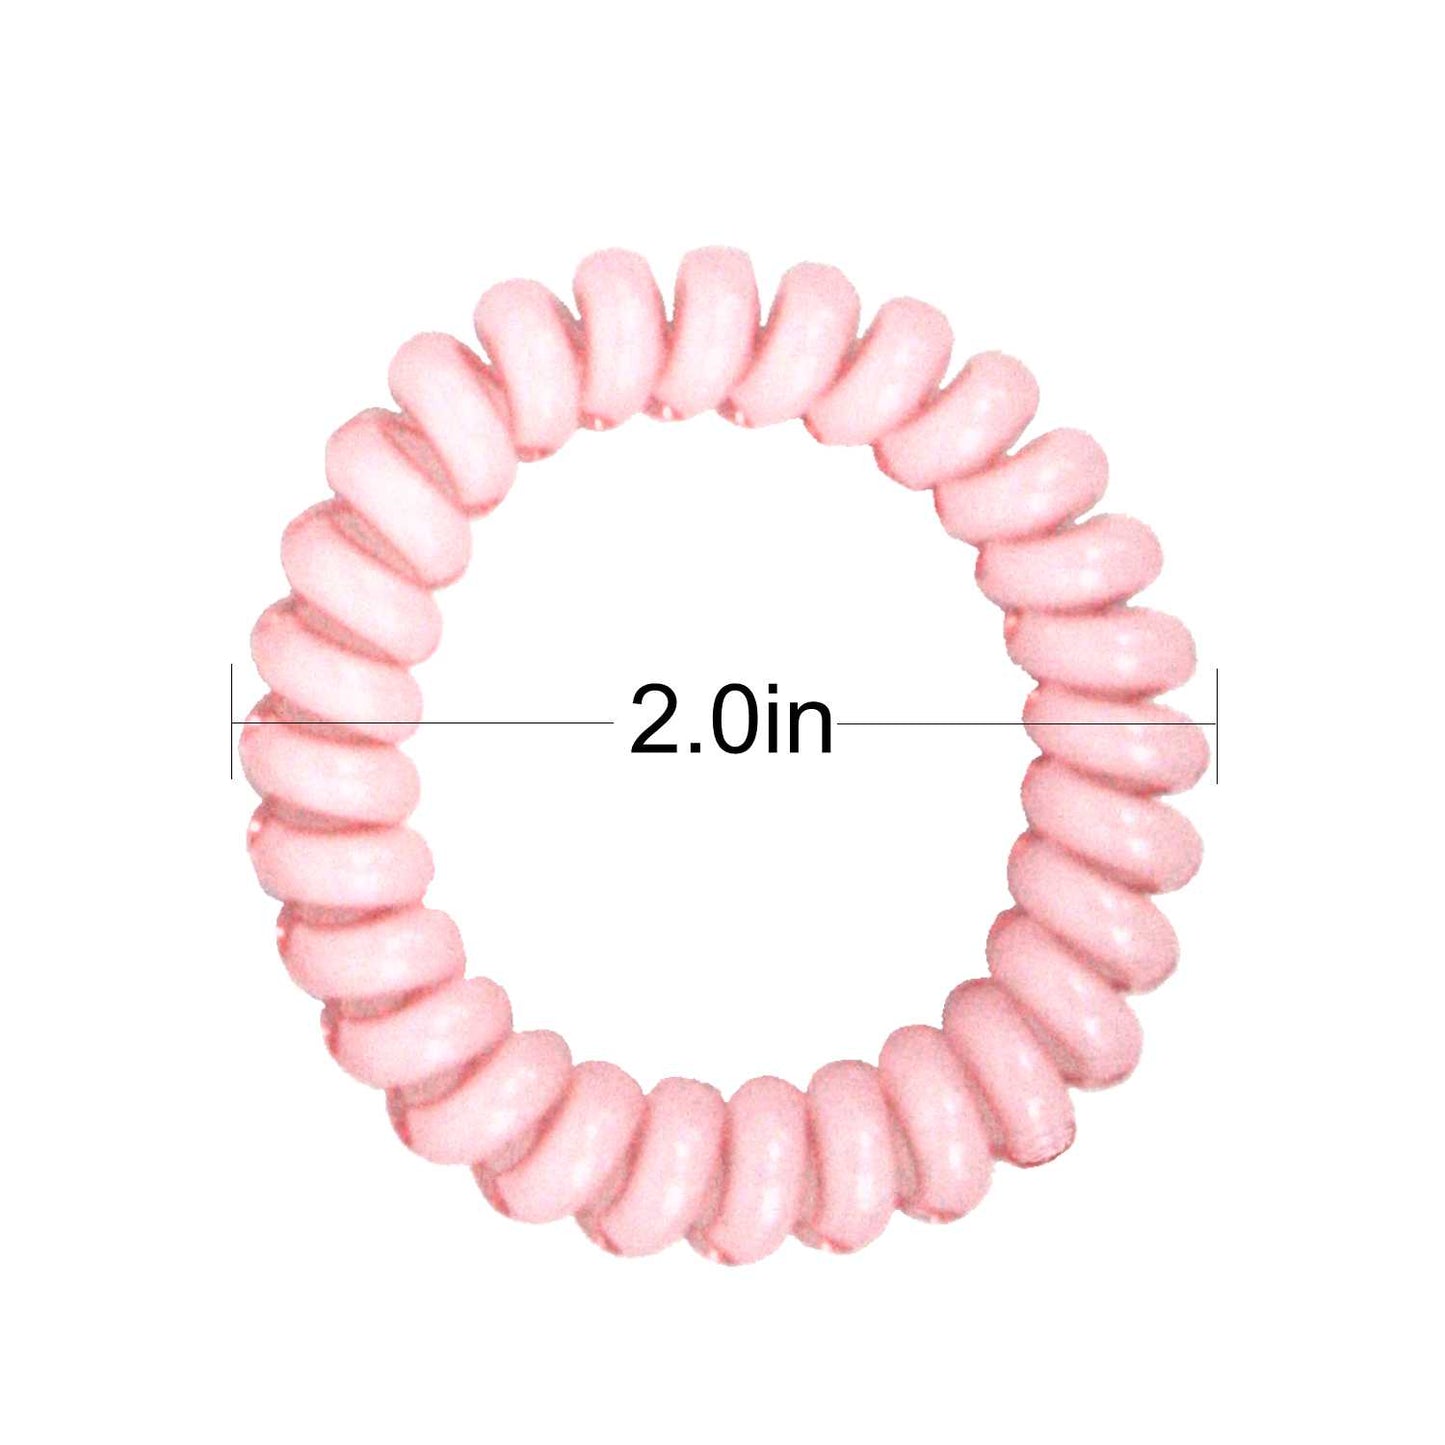 Amelia Beauty Products 8 Medium Elastic Hair Coils, 2.0in Diameter Thick Spiral Hair Ties, Gentle on Hair, Strong Hold and Minimizes Dents and Creases, Pink and White Mix